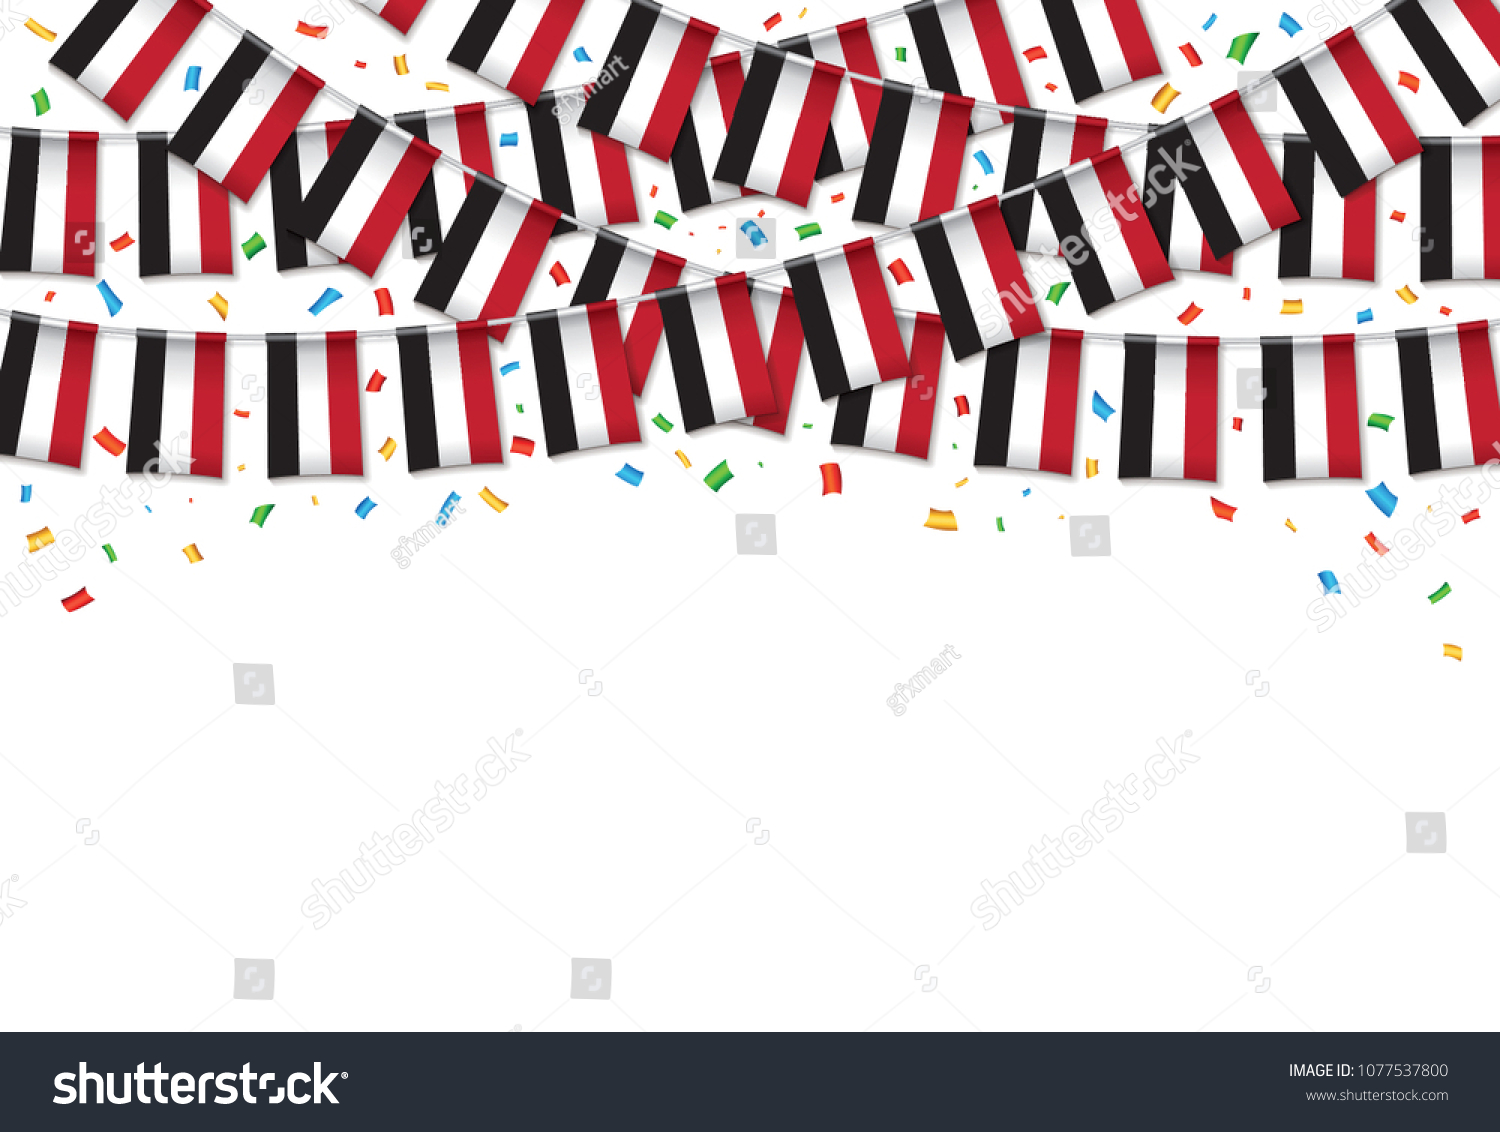 SVG of Yemen flags garland white background with confetti, Hang bunting for Yemeni,  independence Day celebration template banner, Vector illustration svg